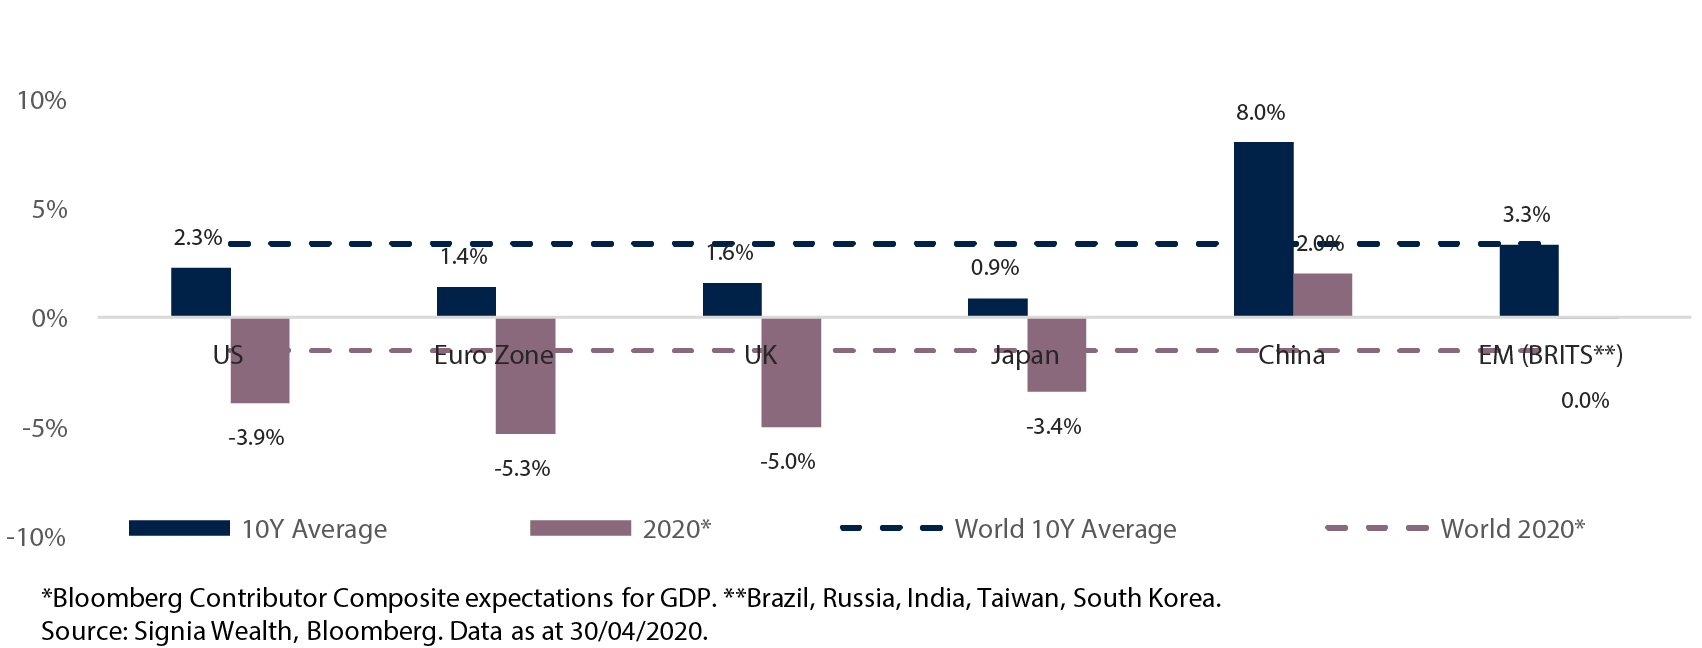 Regional Economic Growth: Last 10 Years versus Expectations for 2020